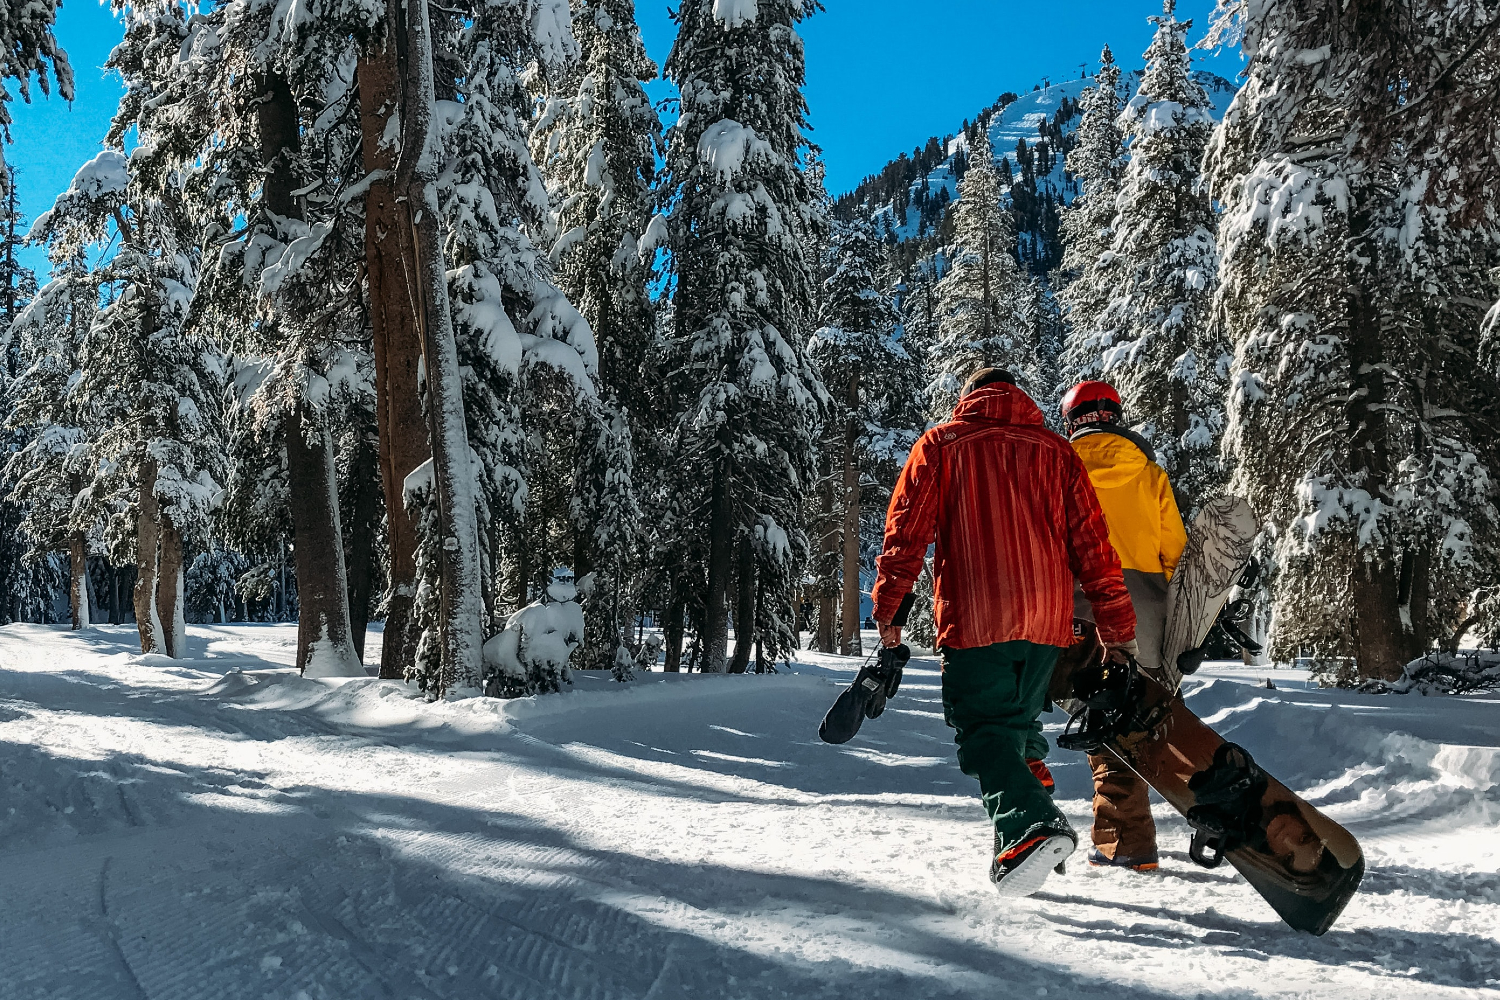 Snowboarding for beginners With our slang guide, you wont look like a newbie